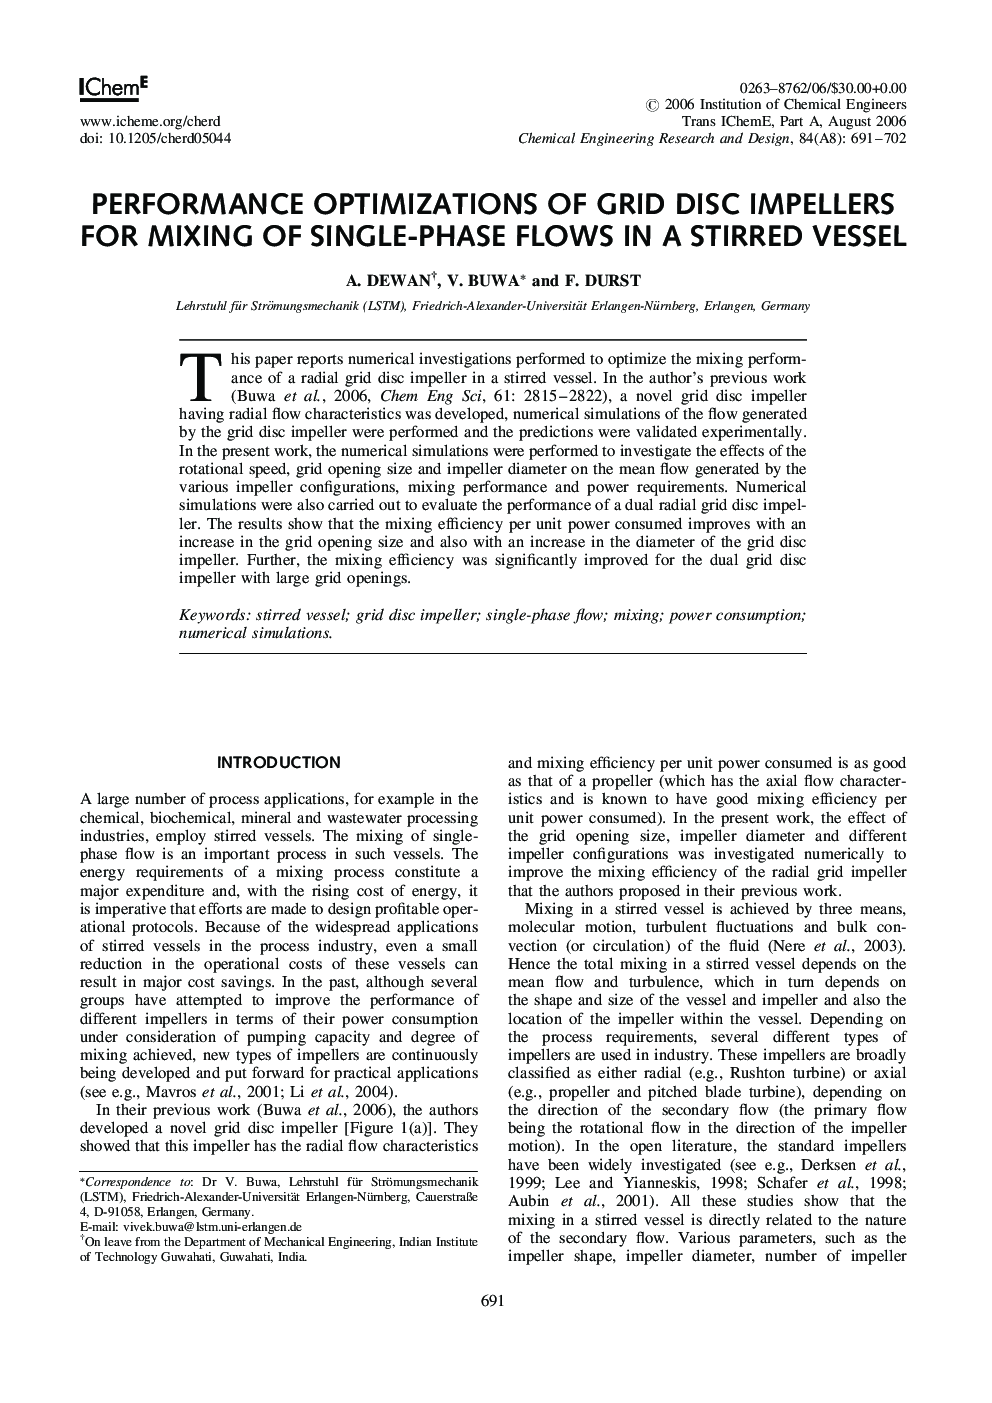 Performance Optimizations of Grid Disc Impellers for Mixing of Single-Phase Flows in a Stirred Vessel